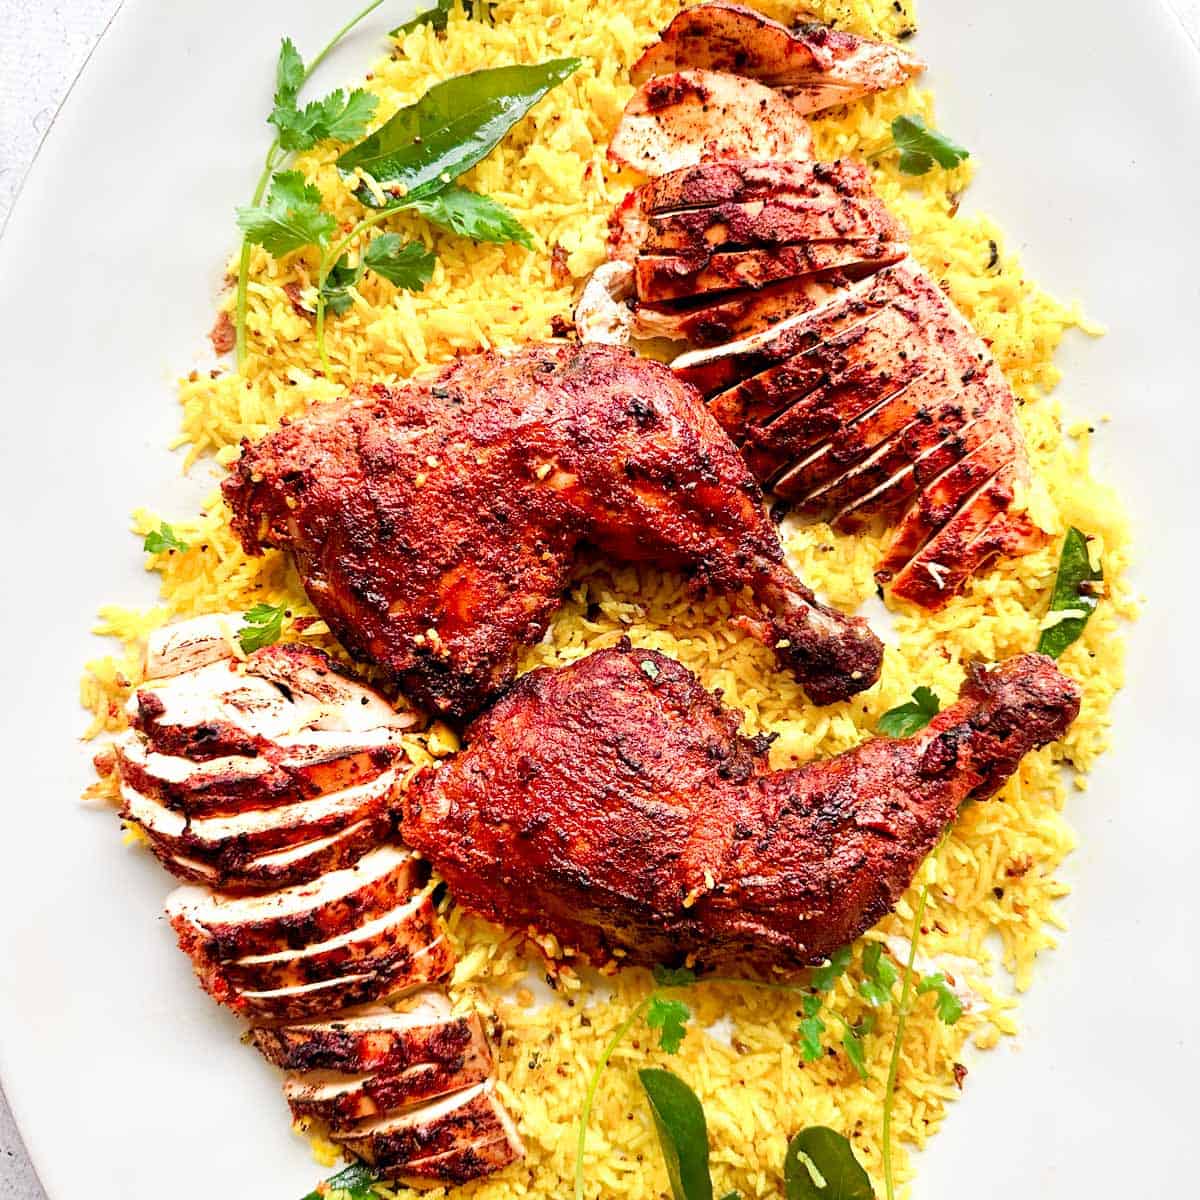 Whole tandoori chicken that is cut and served on a large platter on top of lemon rice.